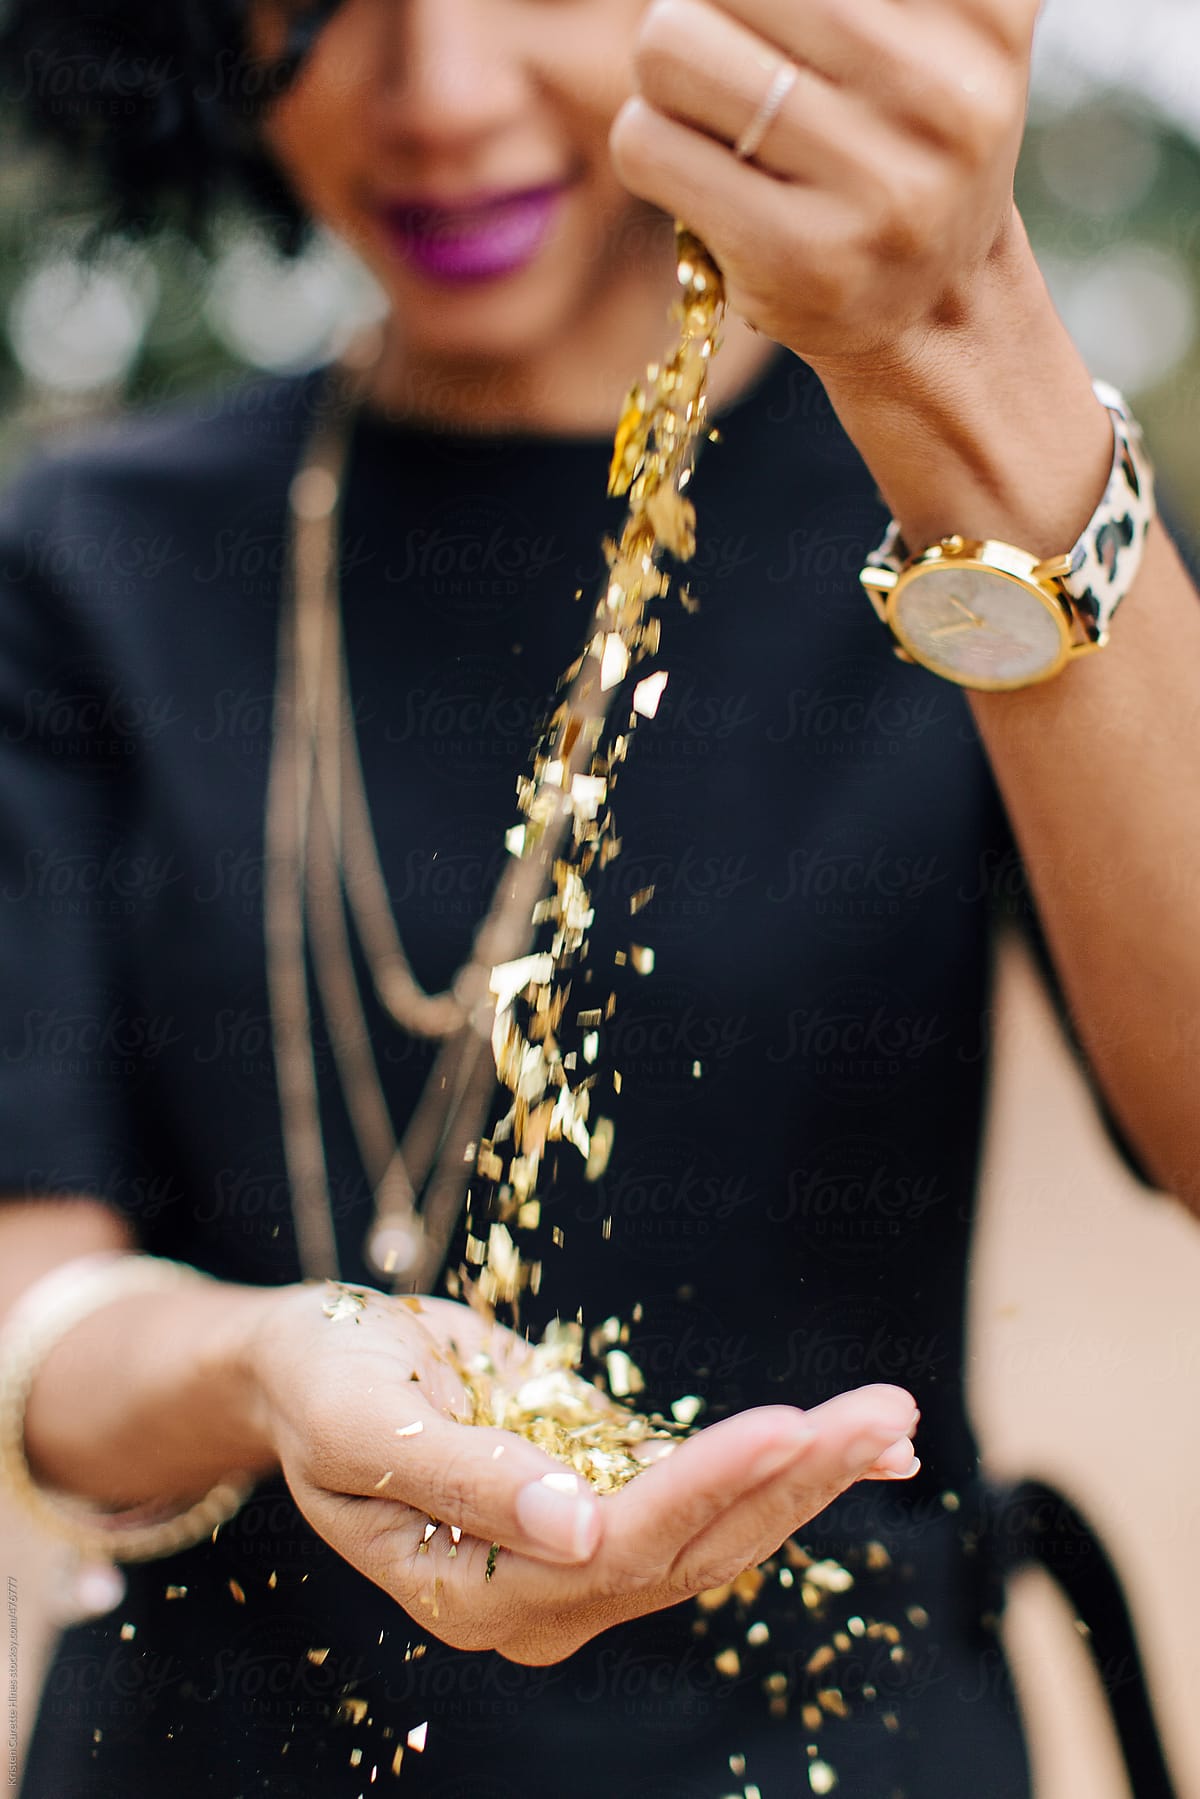 Woman pouring gold glitter / confetti in her hands.